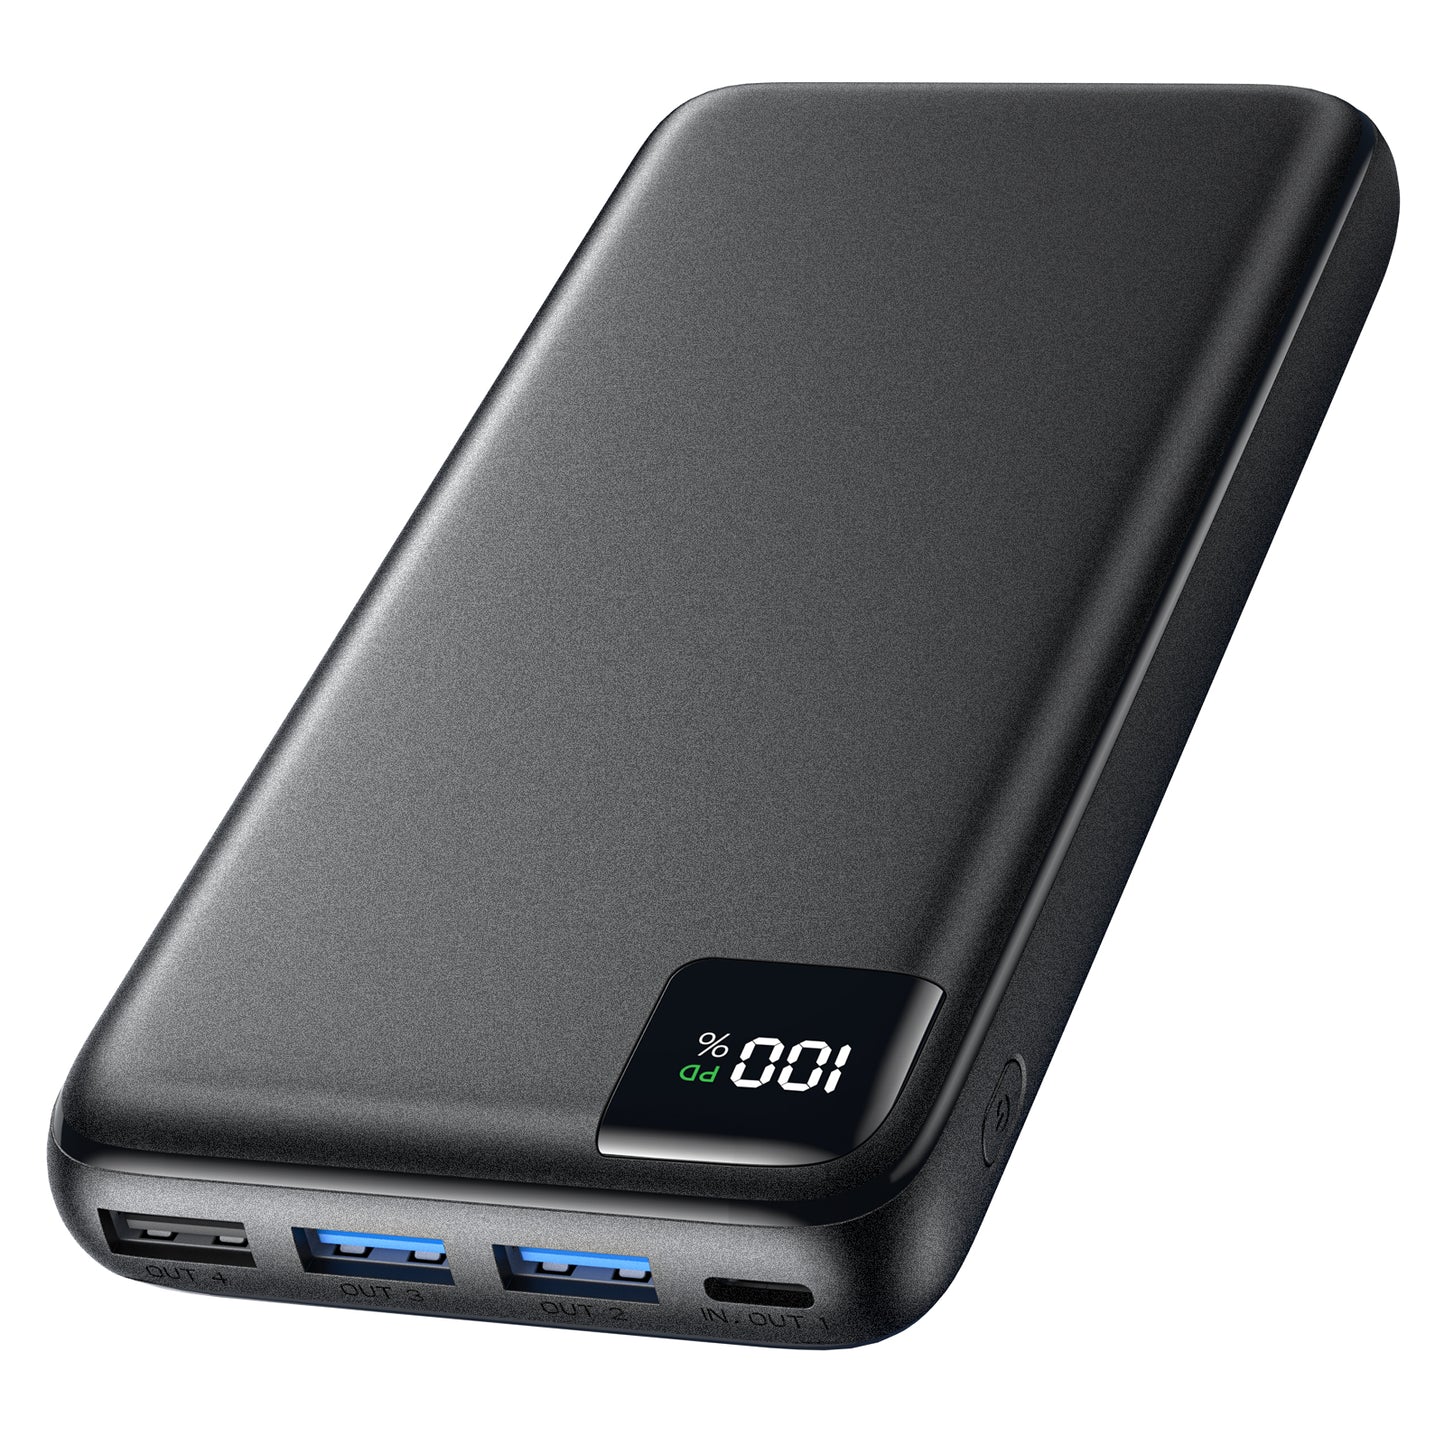 Power Bank 26800mAh Portable Charger with 4 Outputs - Black – ADDTOP